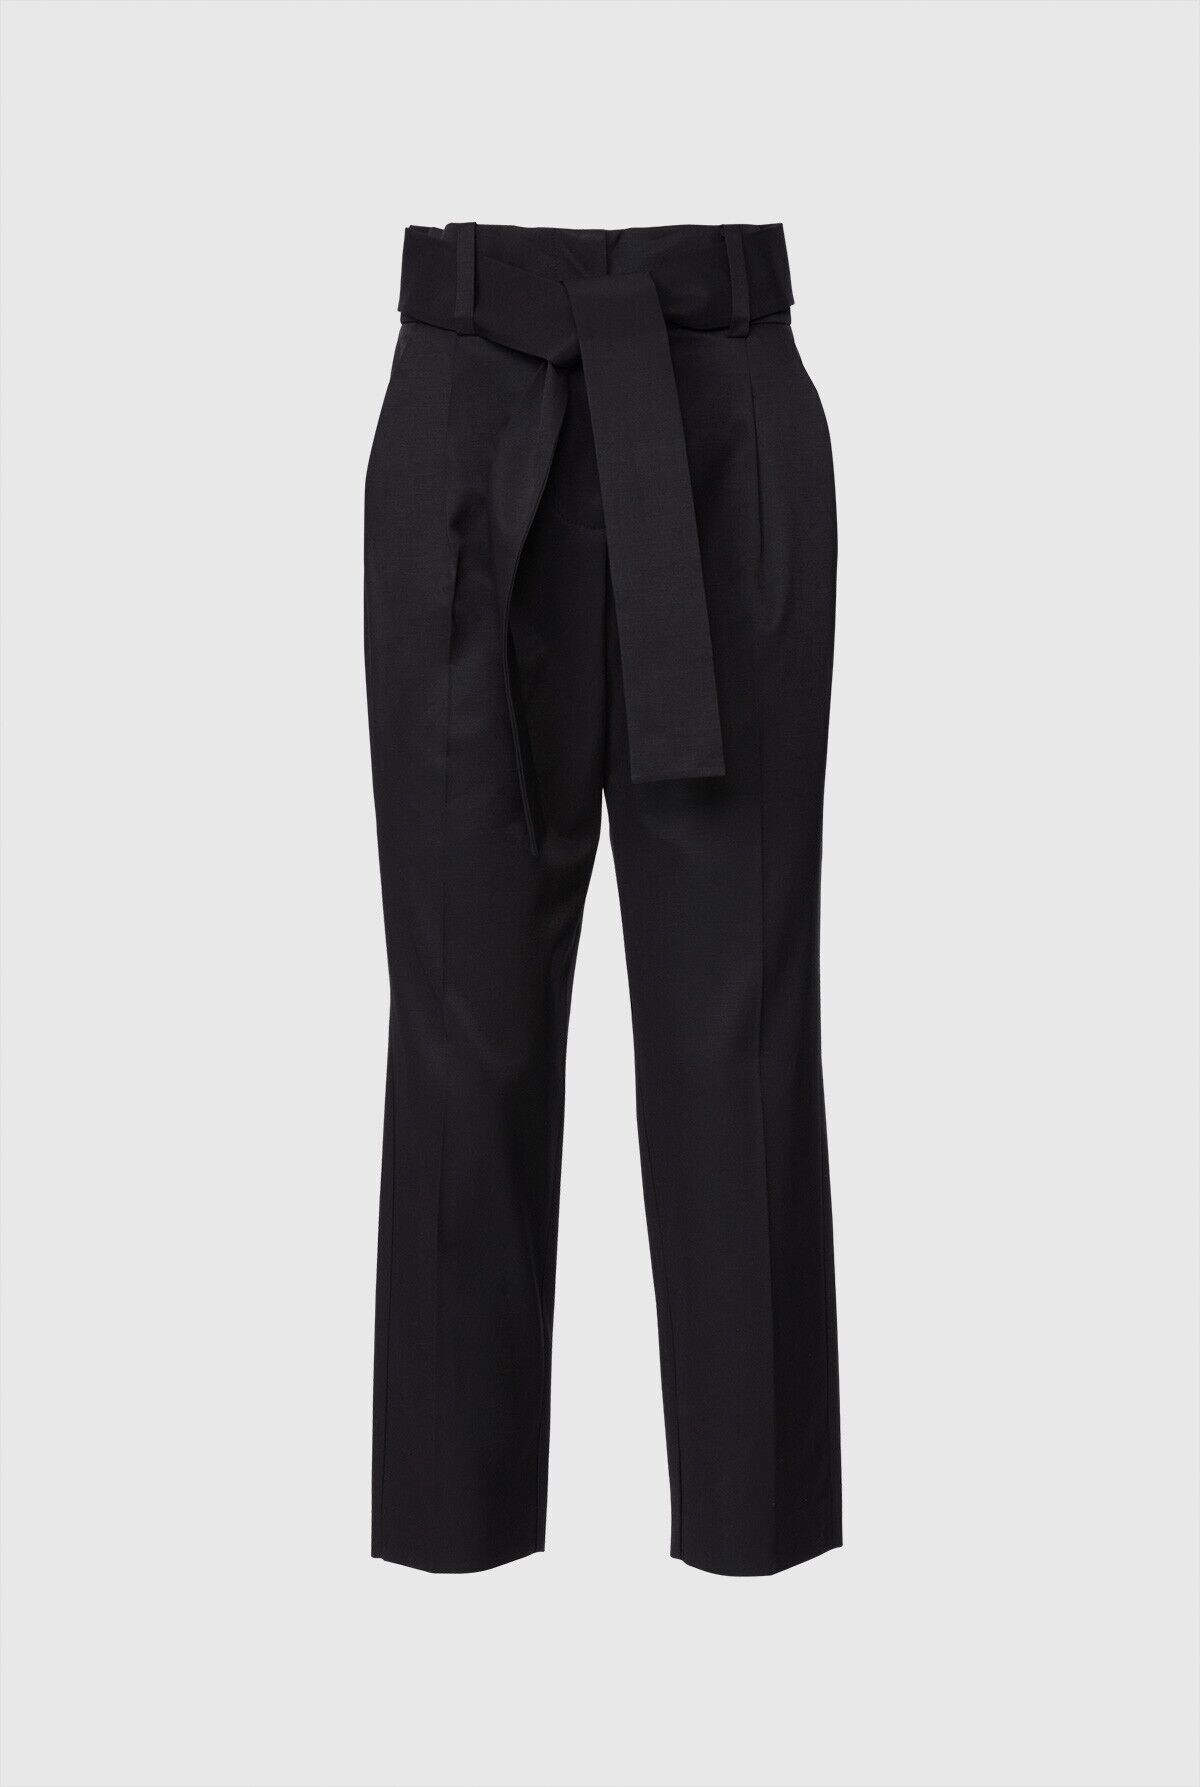  GIZIA - High Waist Belted Ankle Length Black Trousers